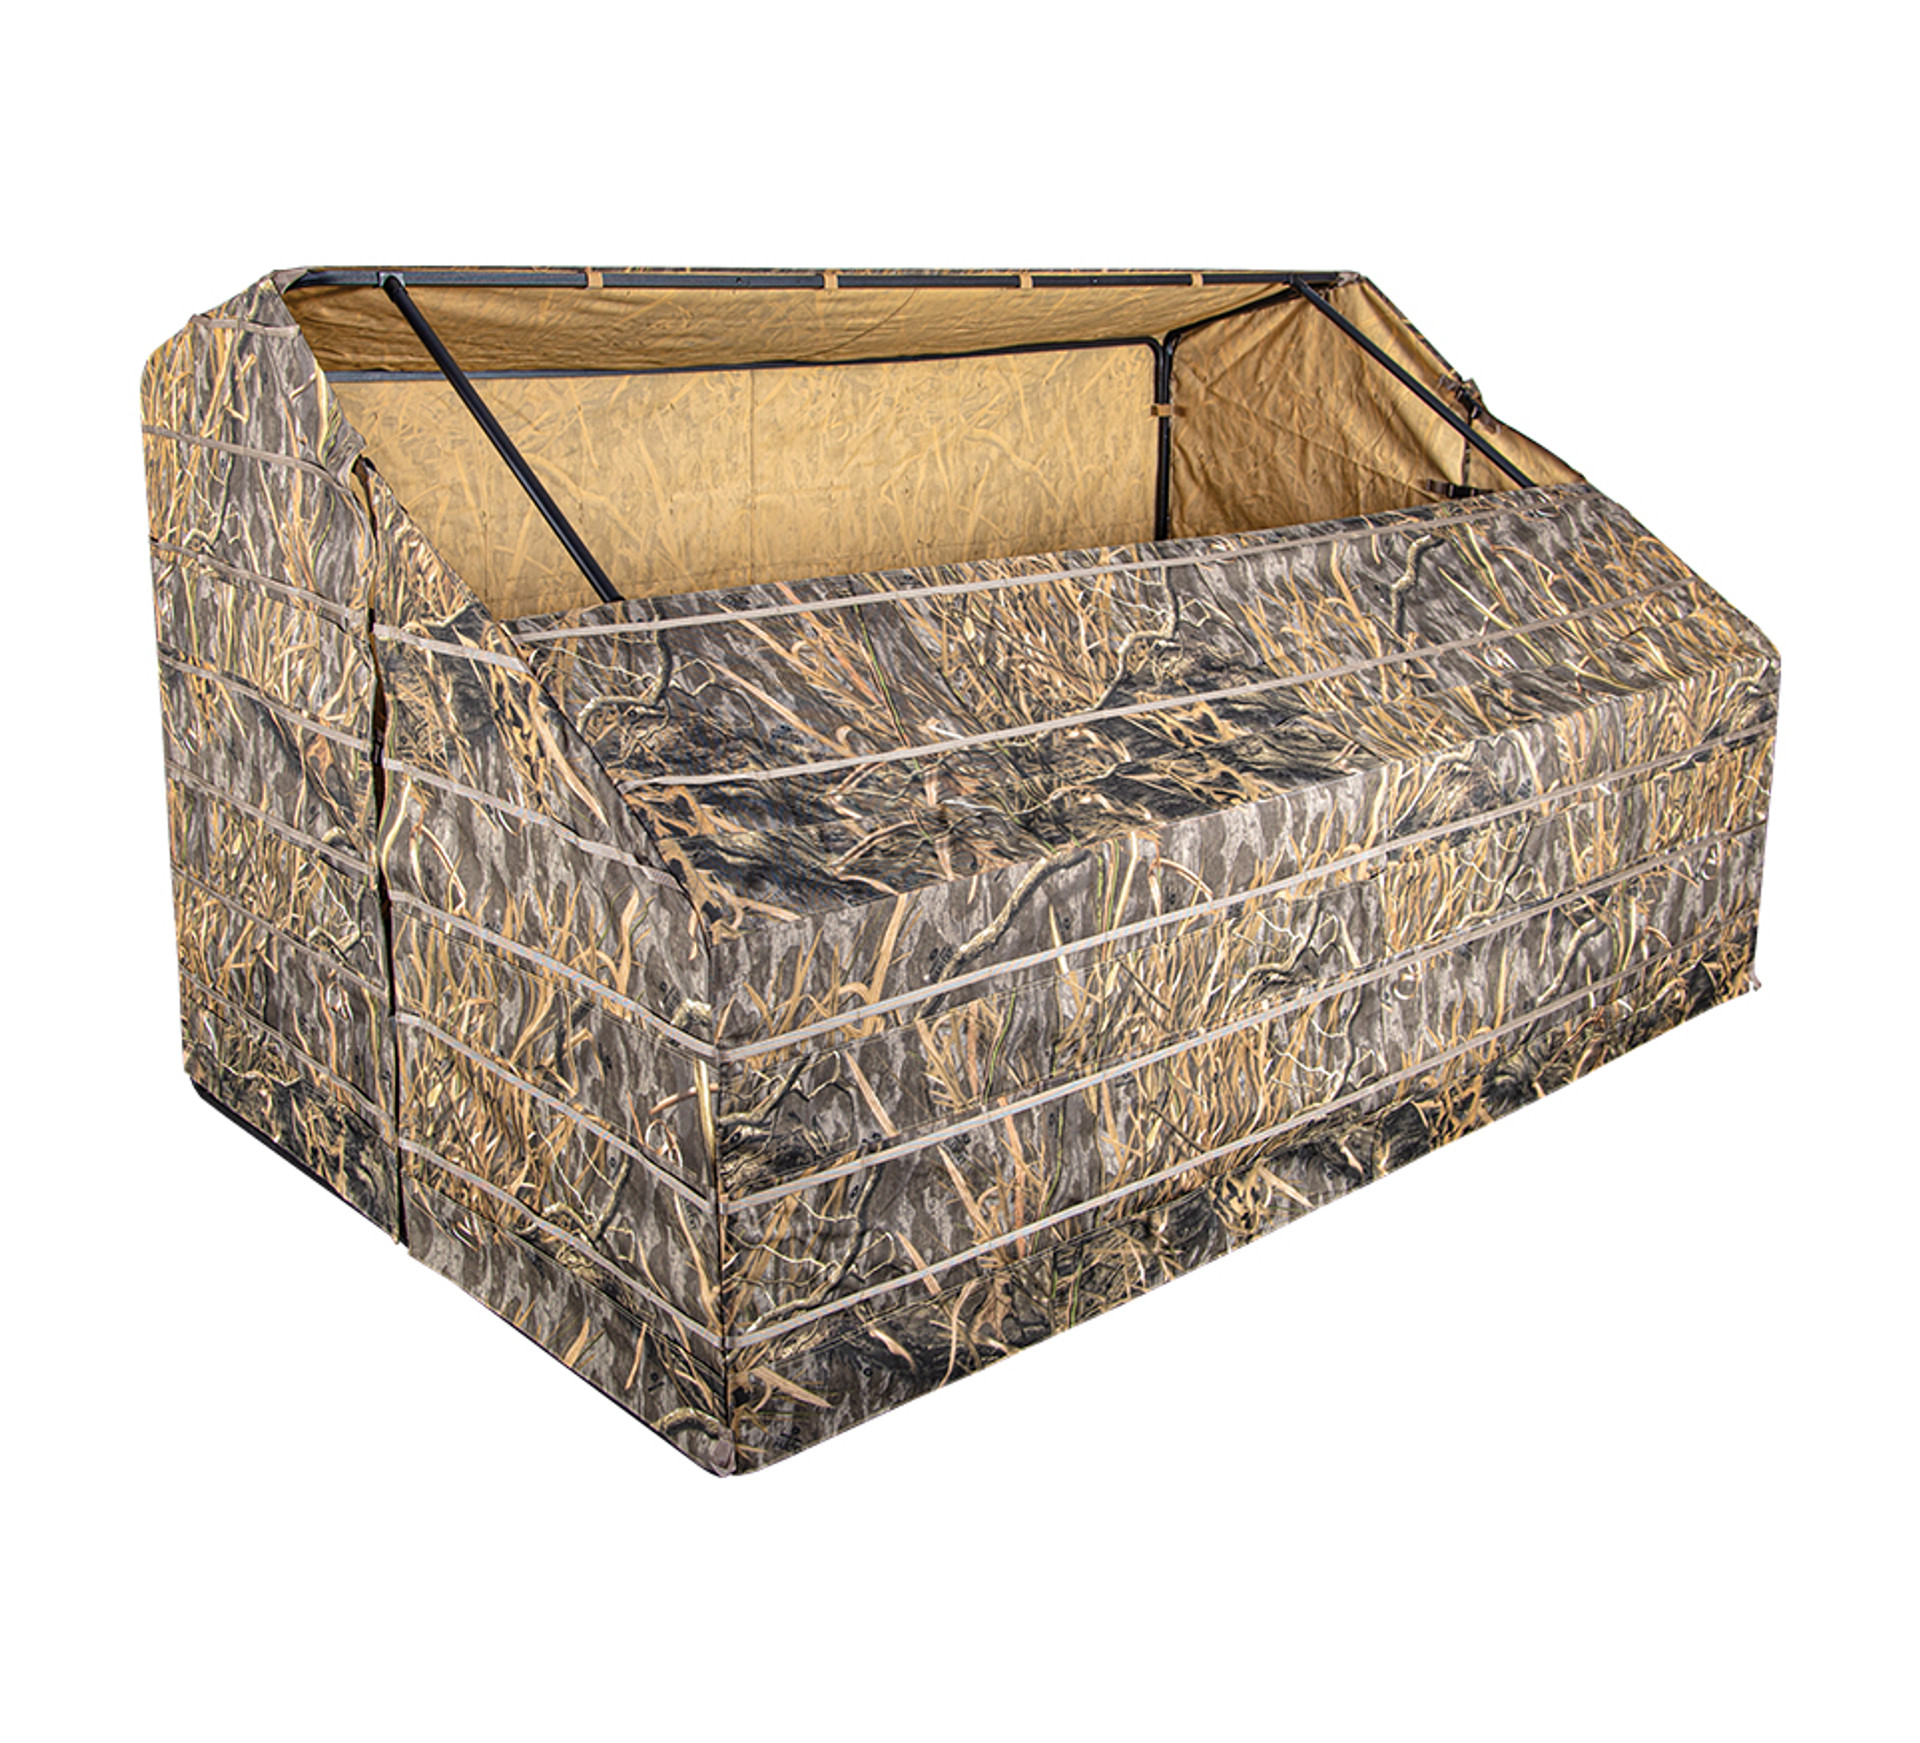 Duck Blinds Waterfowl Hunting Blinds Avian X